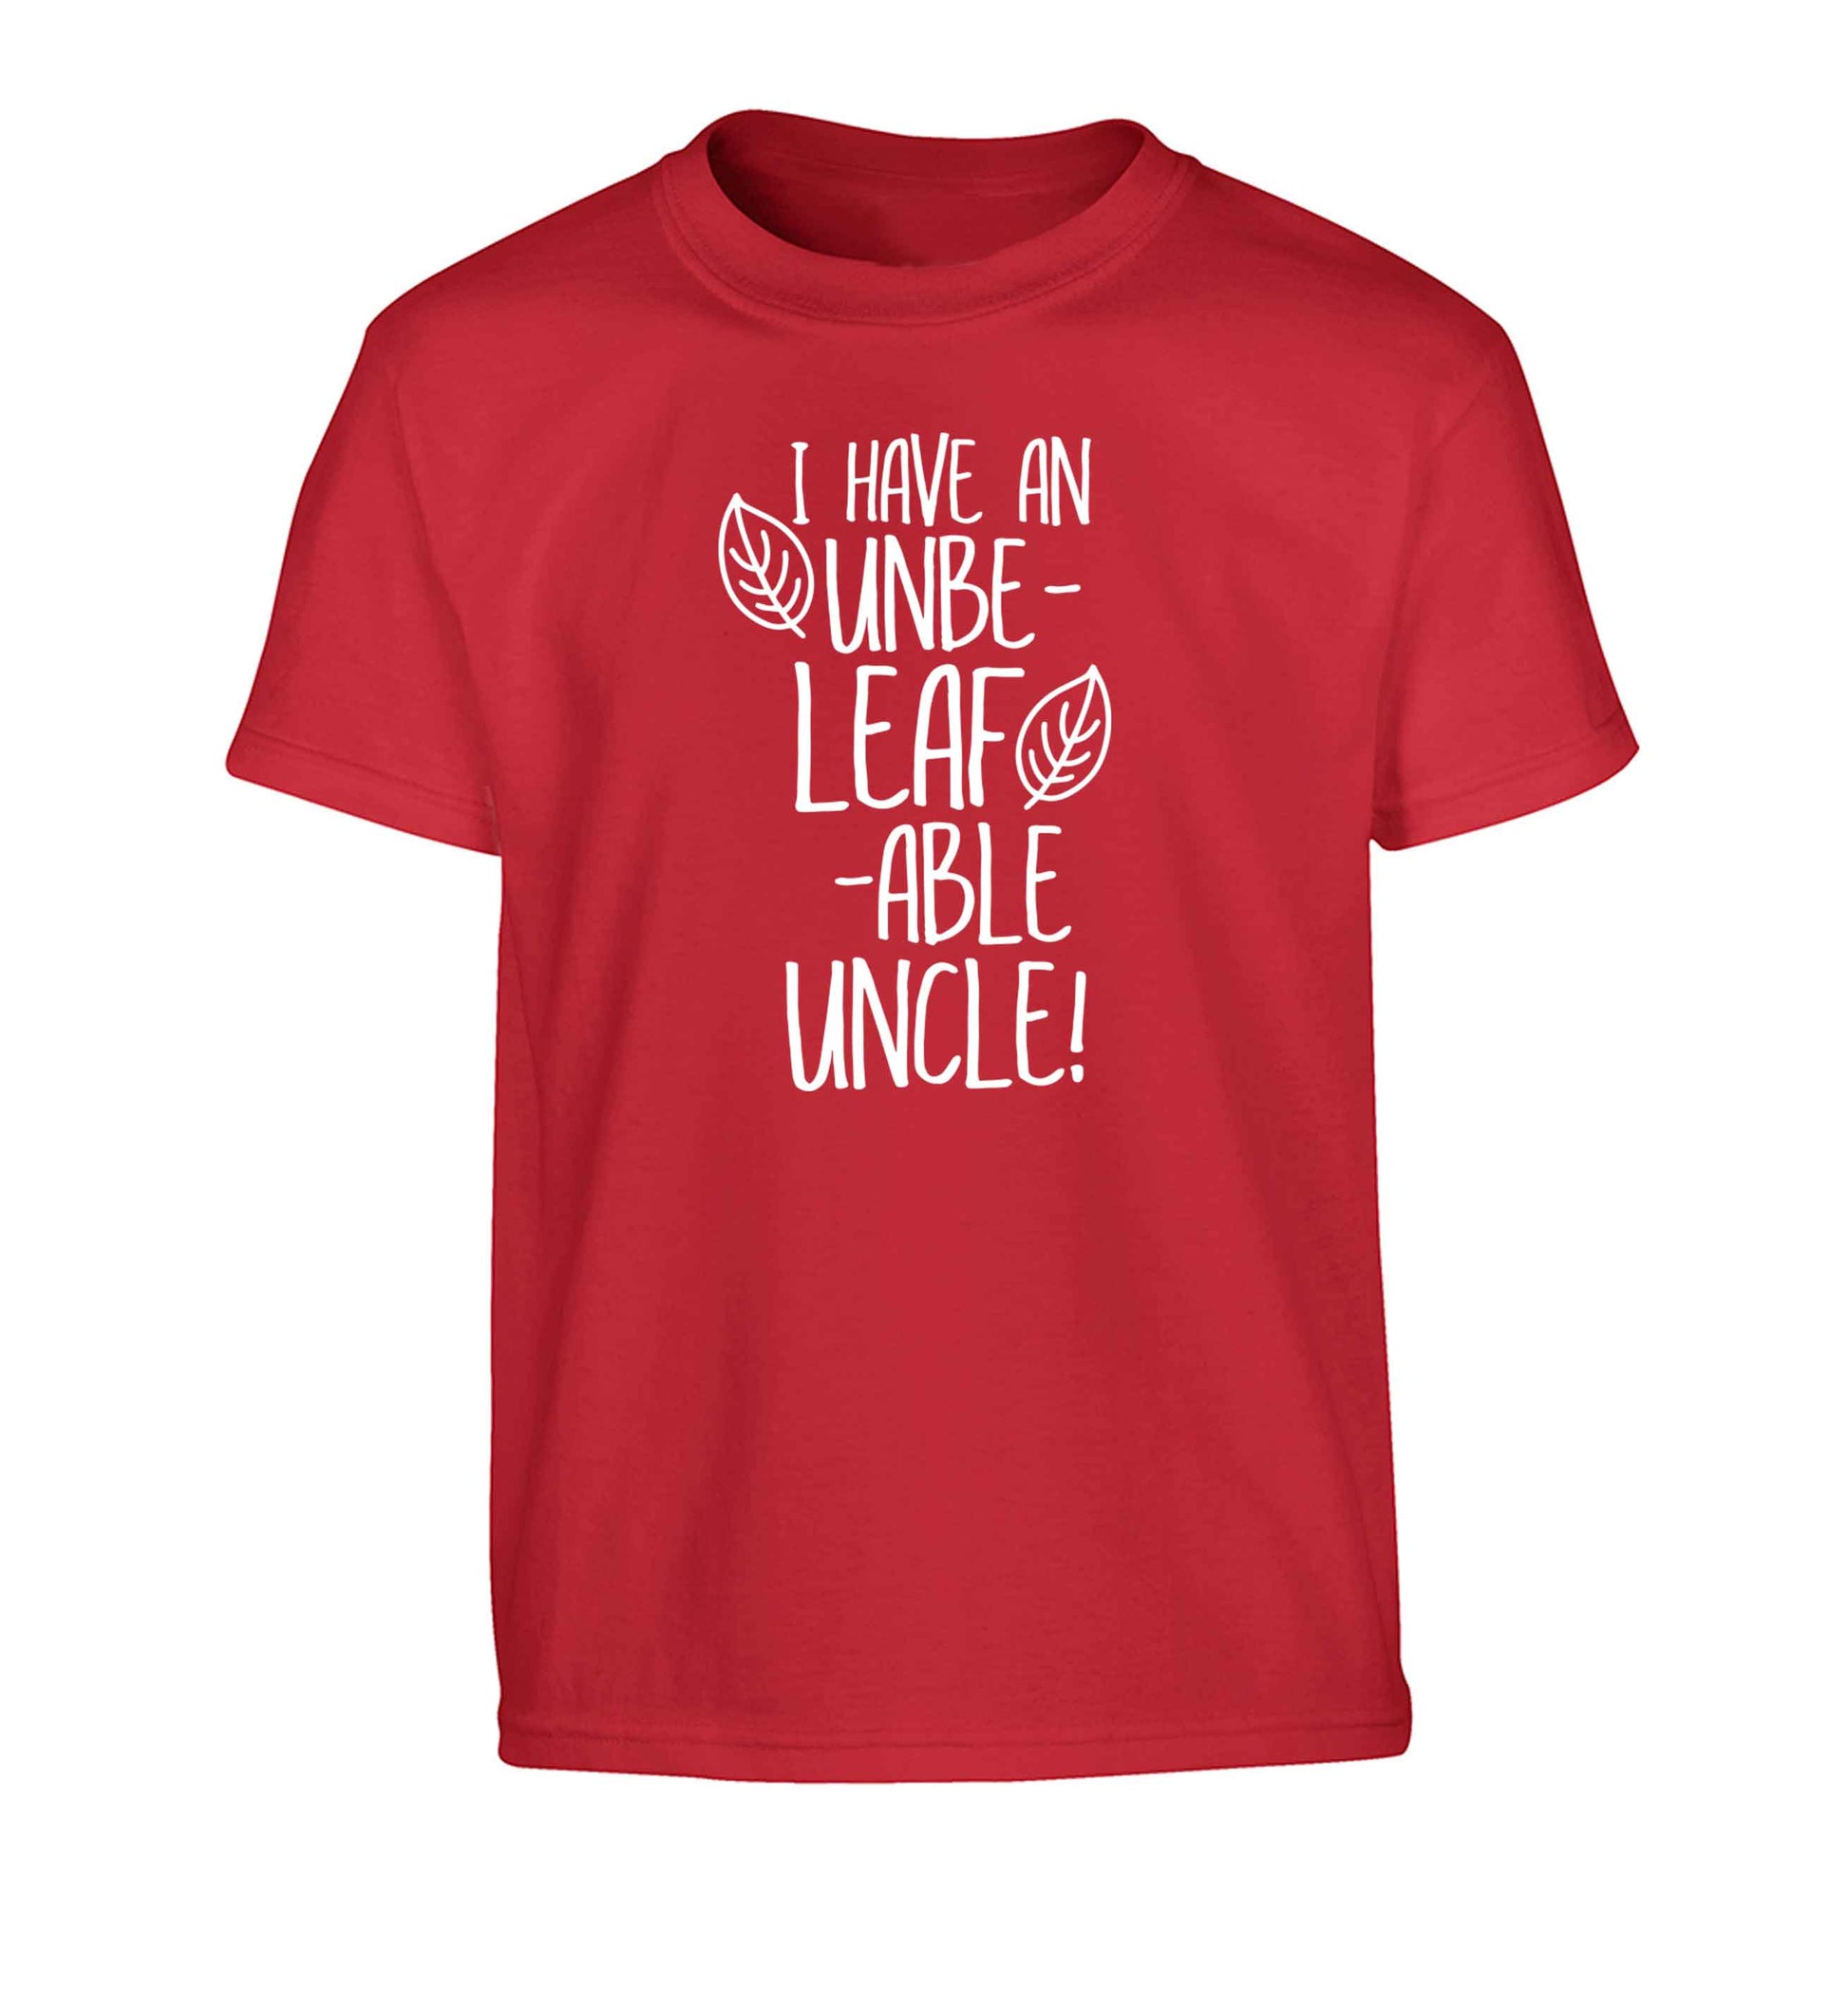 I have an unbe-leaf-able uncle Children's red Tshirt 12-13 Years